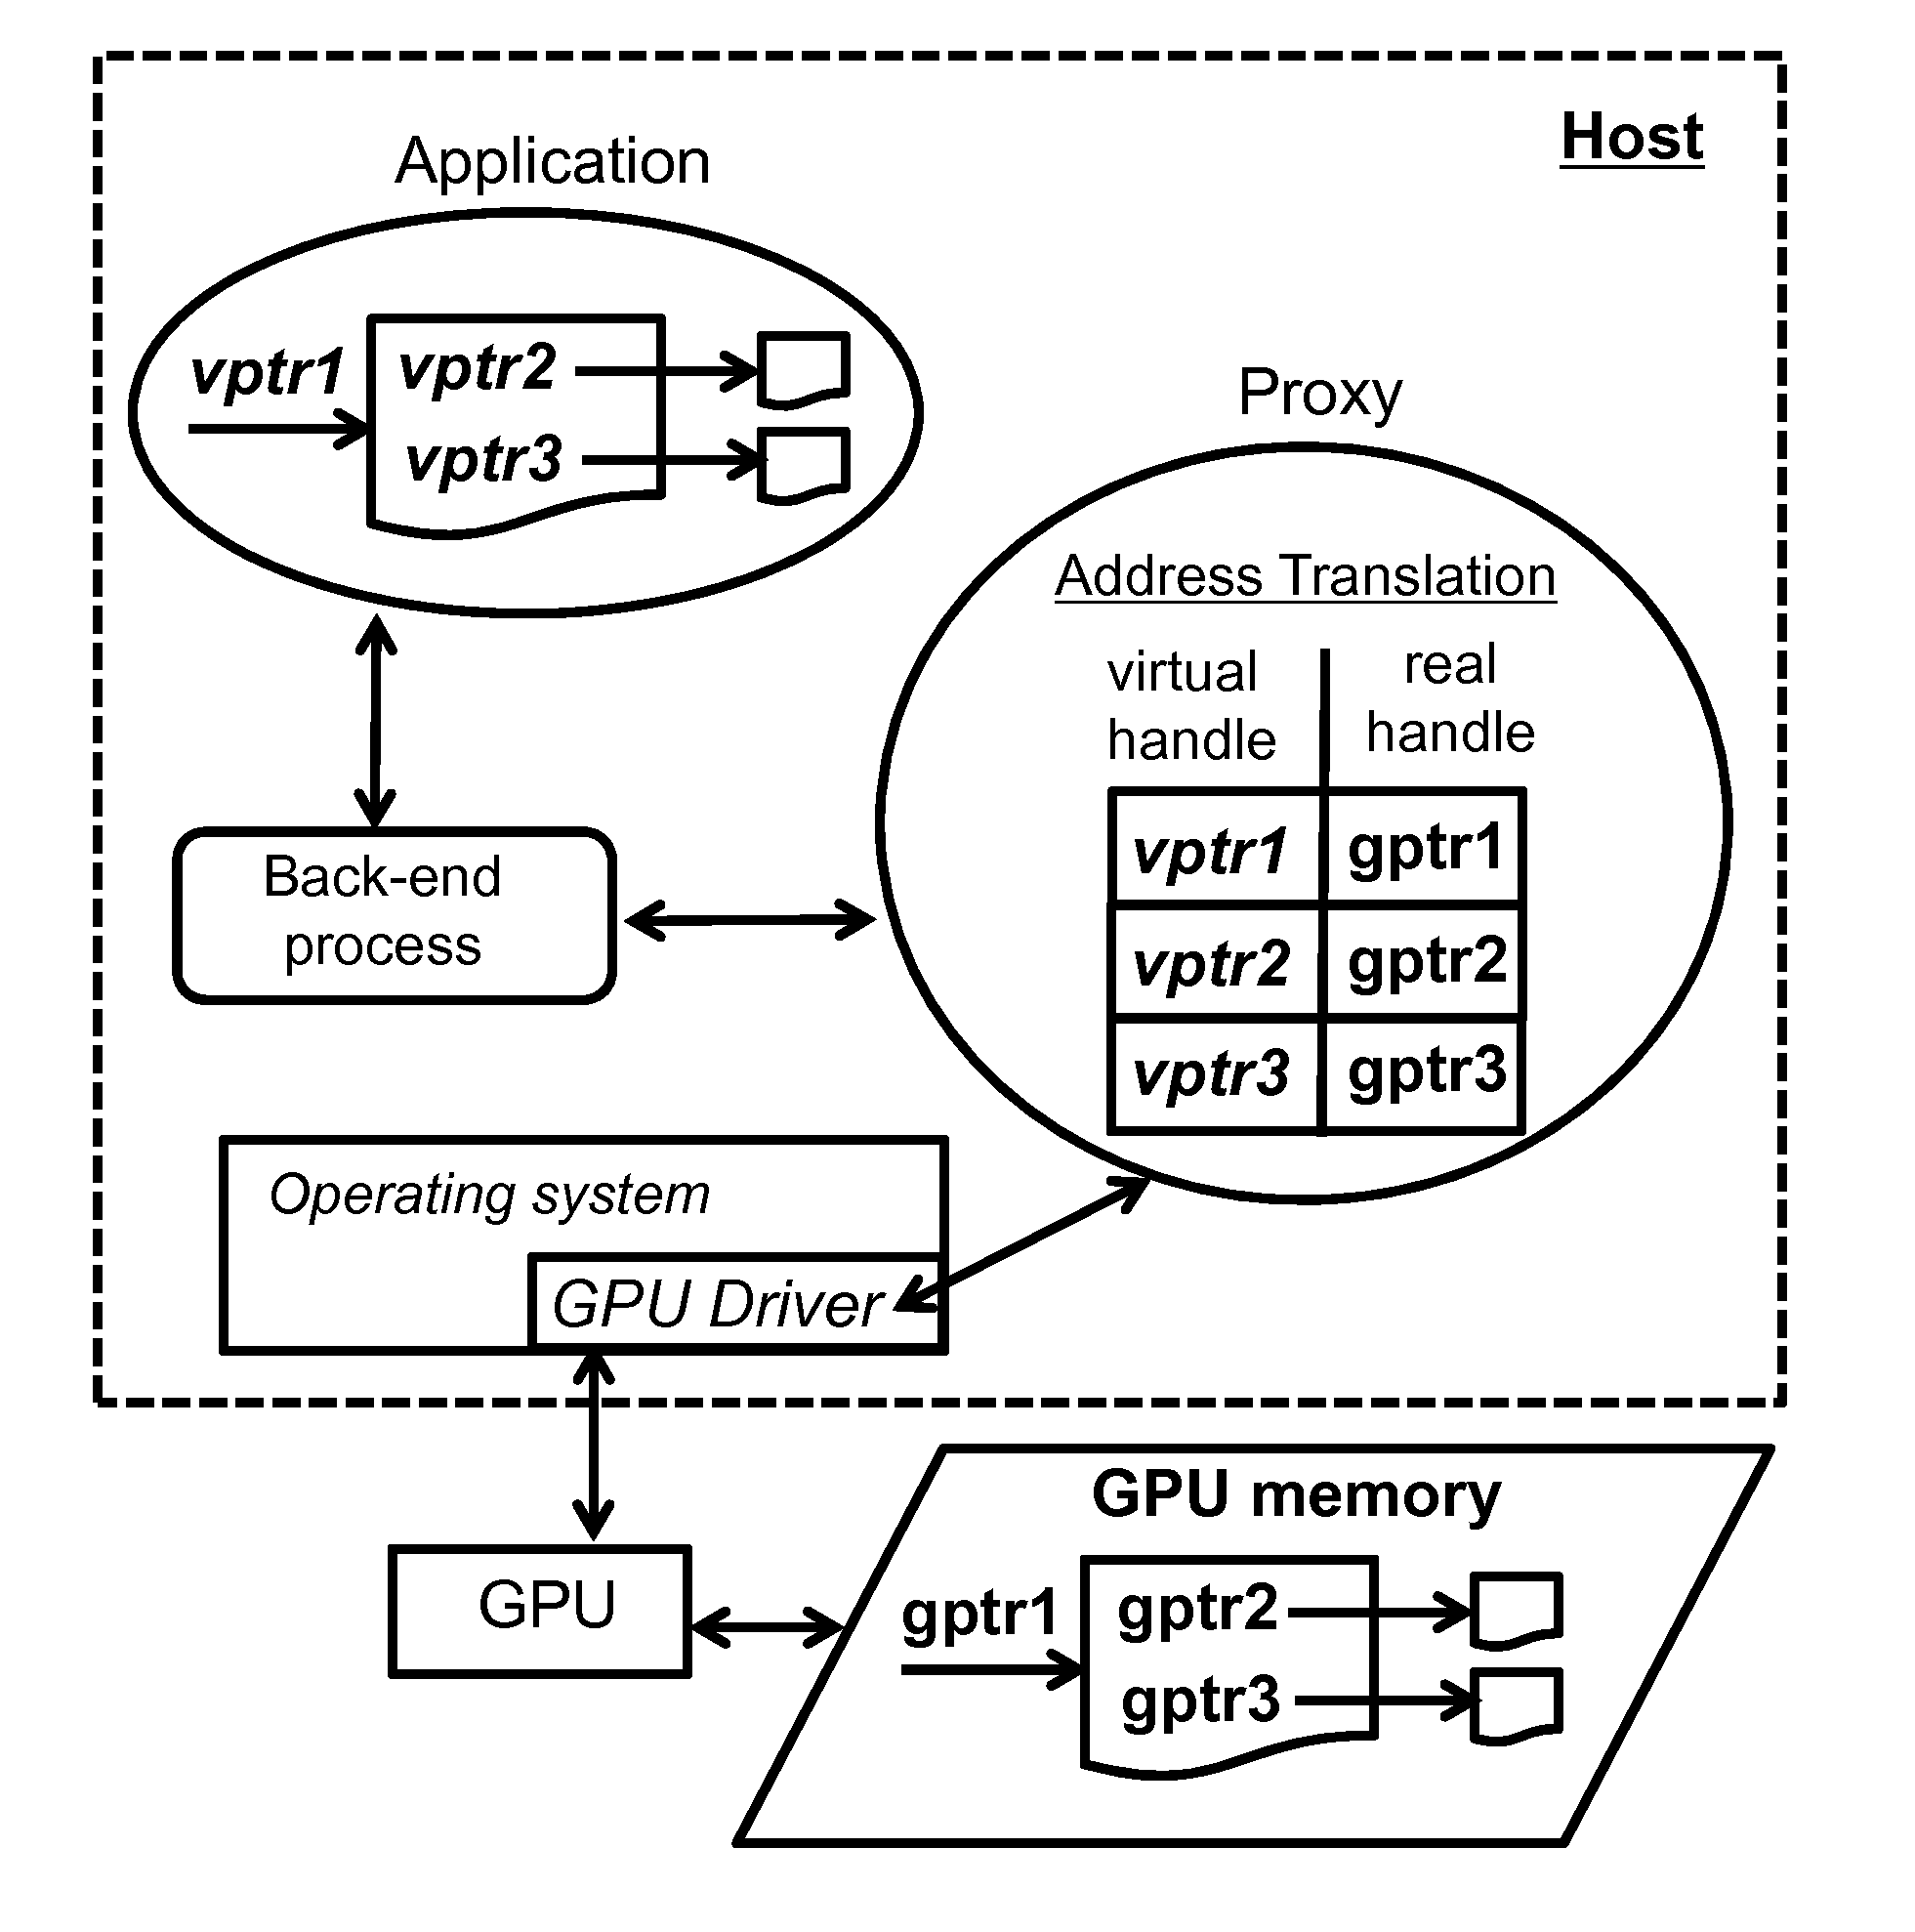 Method and system to dynamically bind and unbind applications on a general purpose graphics processing unit